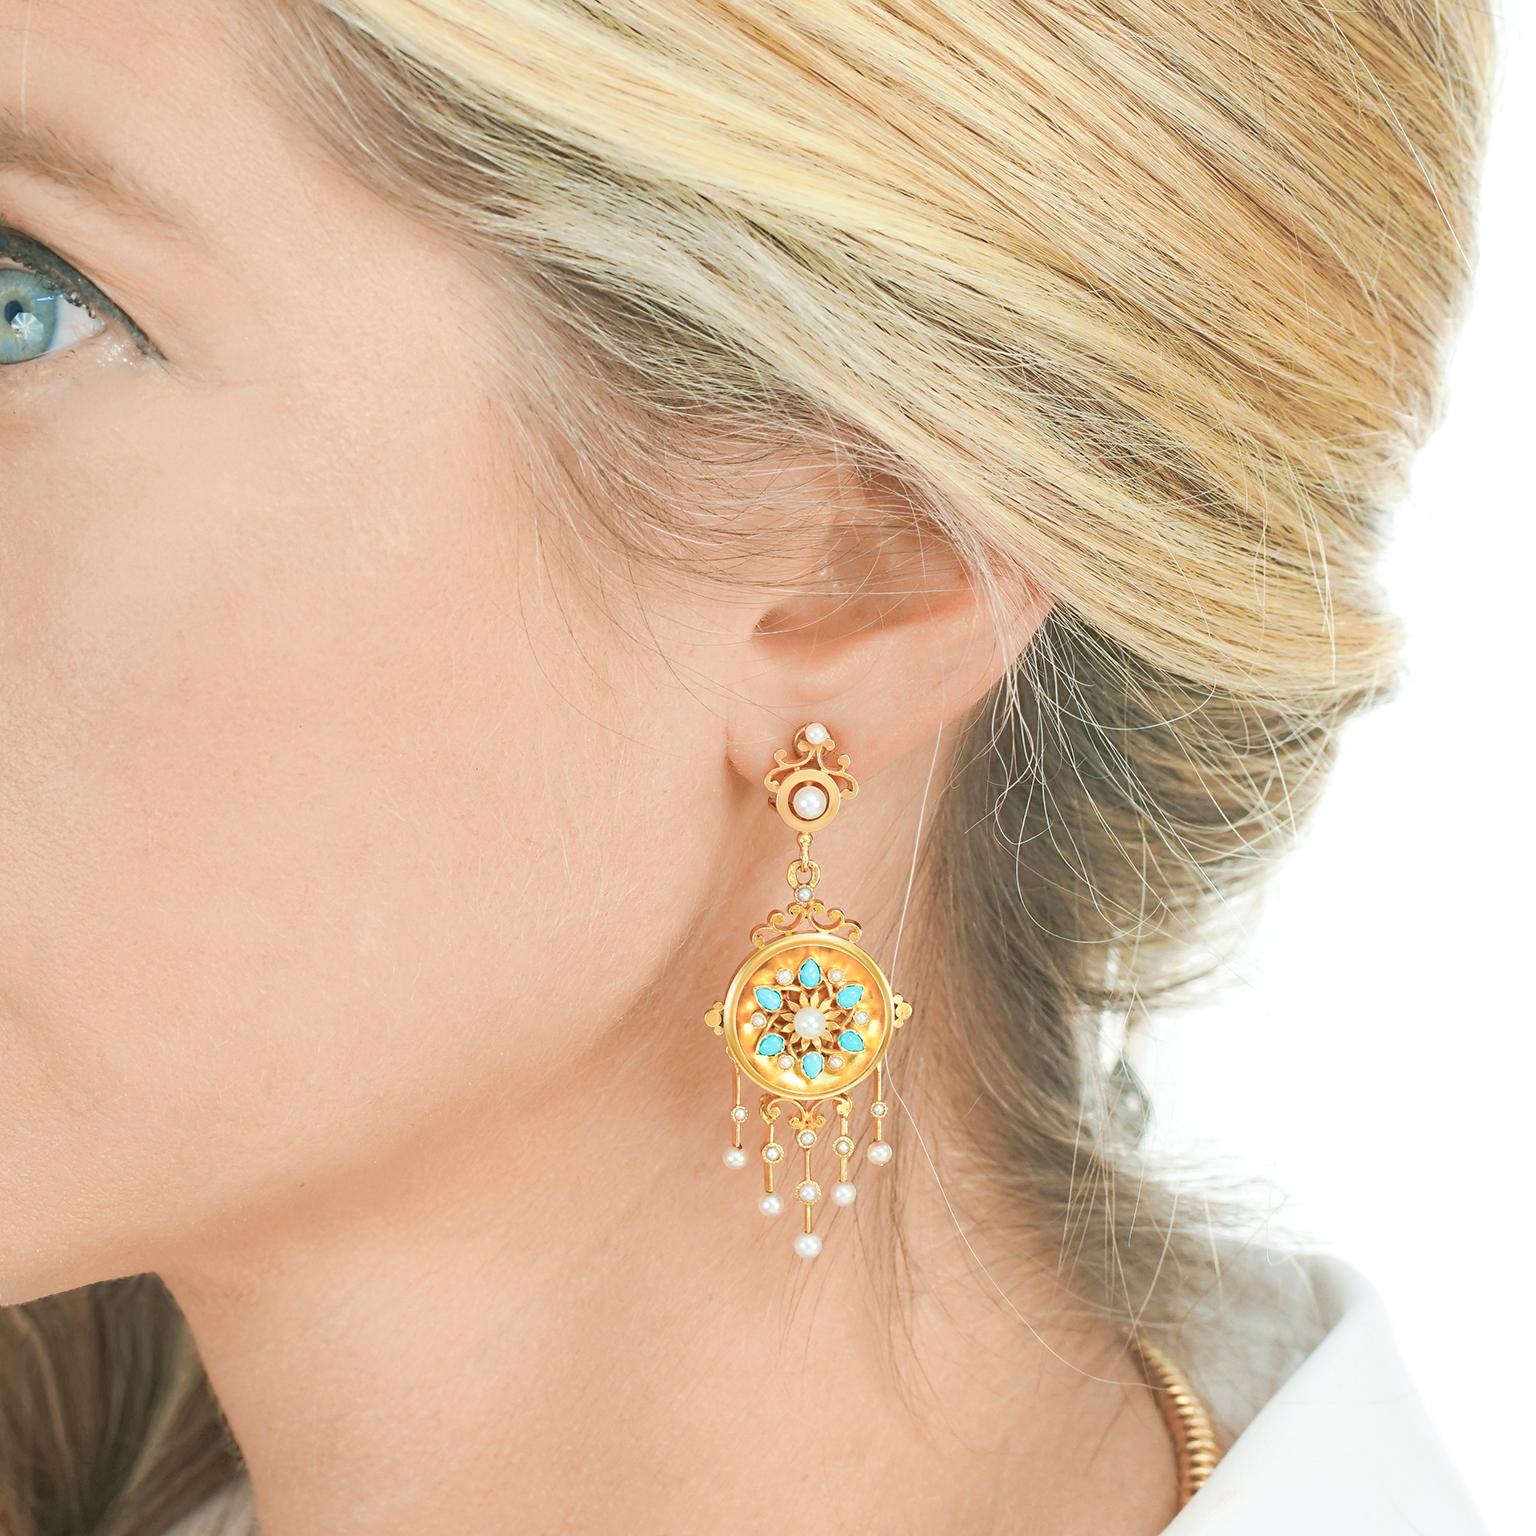 Circa 1880s, 18k, French.  These antique chandelier earrings are set with brilliant blue Persian Turquoise in a stylishly refreshing revivalist design. Intricate gold-work, underscored by meticulous hand-fabrication and delightful movement, all add